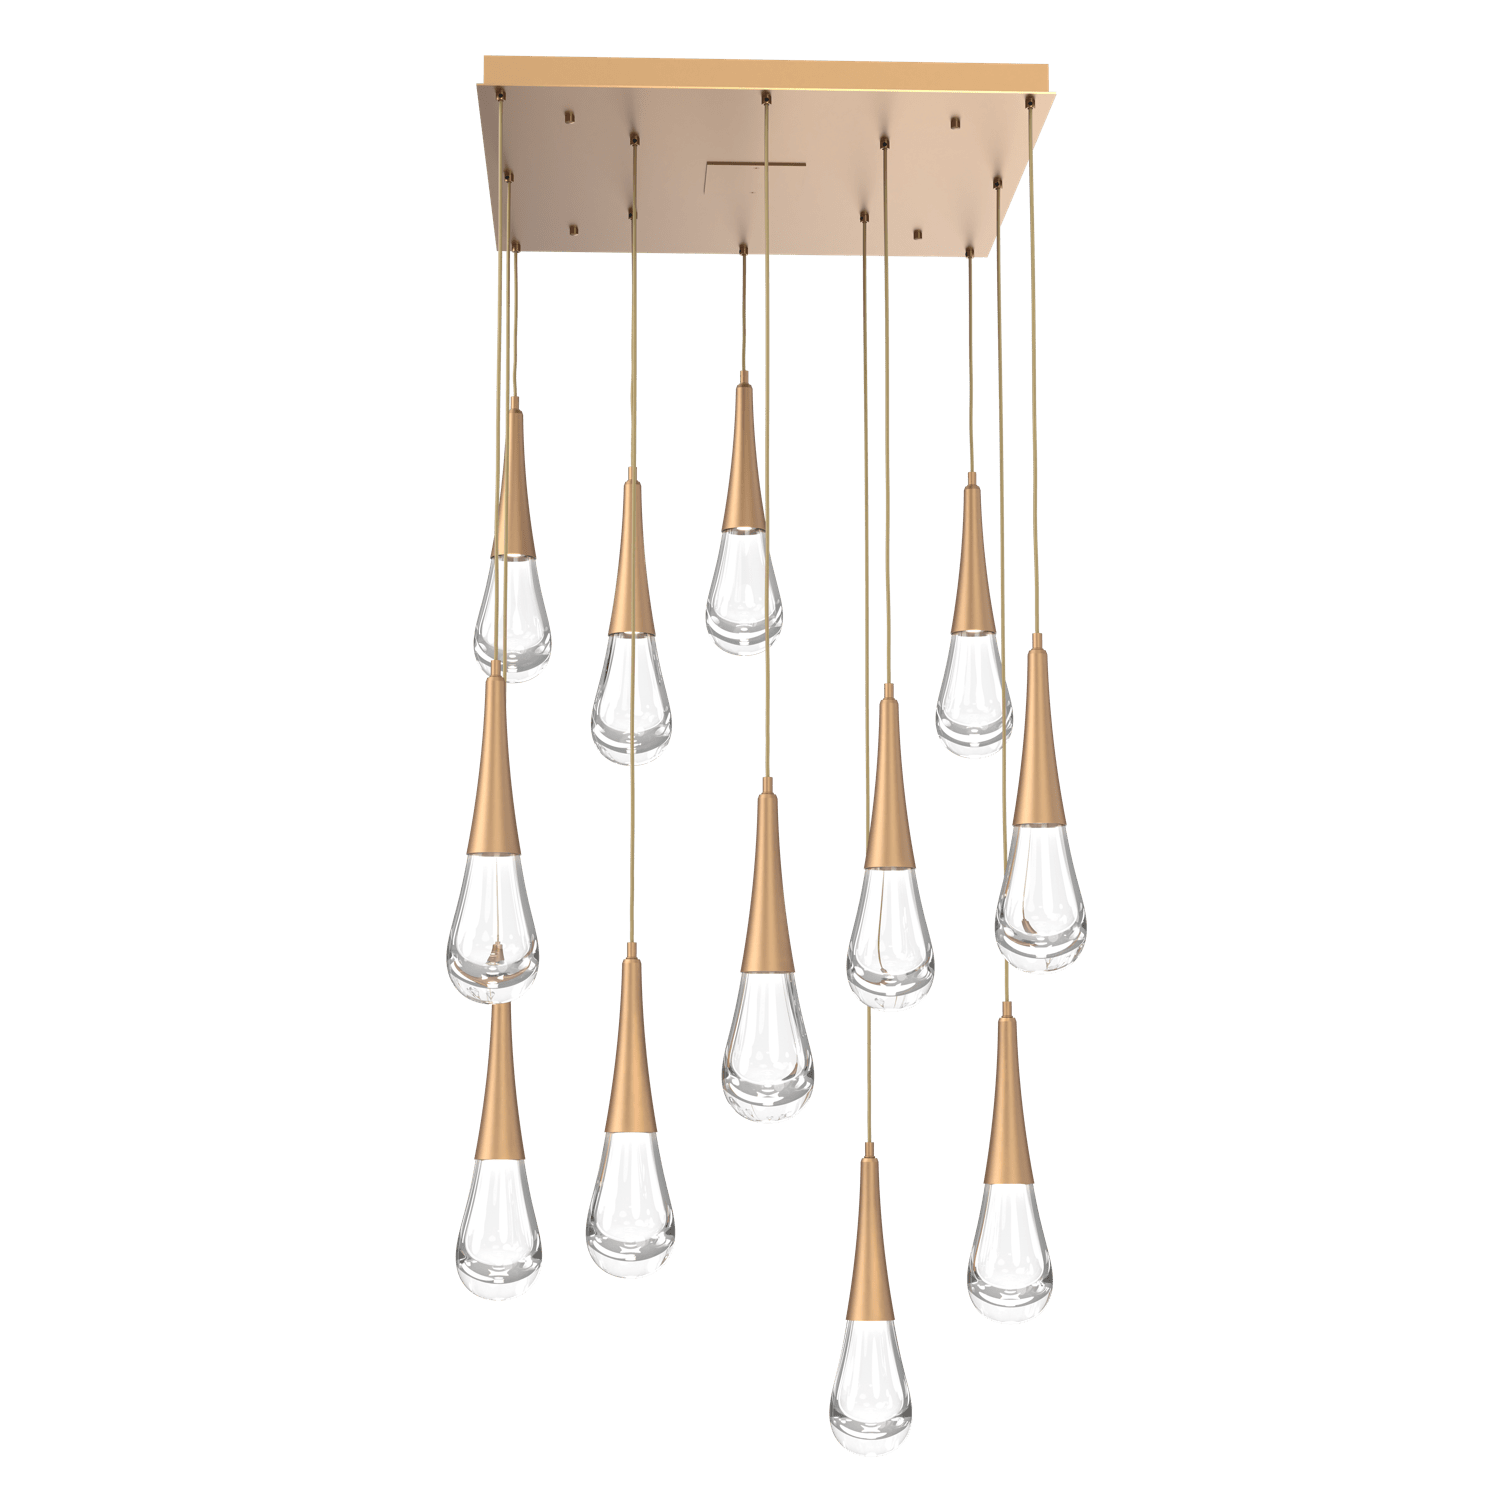 CHB0078-12-NB-Hammerton-Studio-Raindrop-12-light-square-pendant-chandelier-with-novel-brass-finish-and-clear-blown-glass-shades-and-LED-lamping